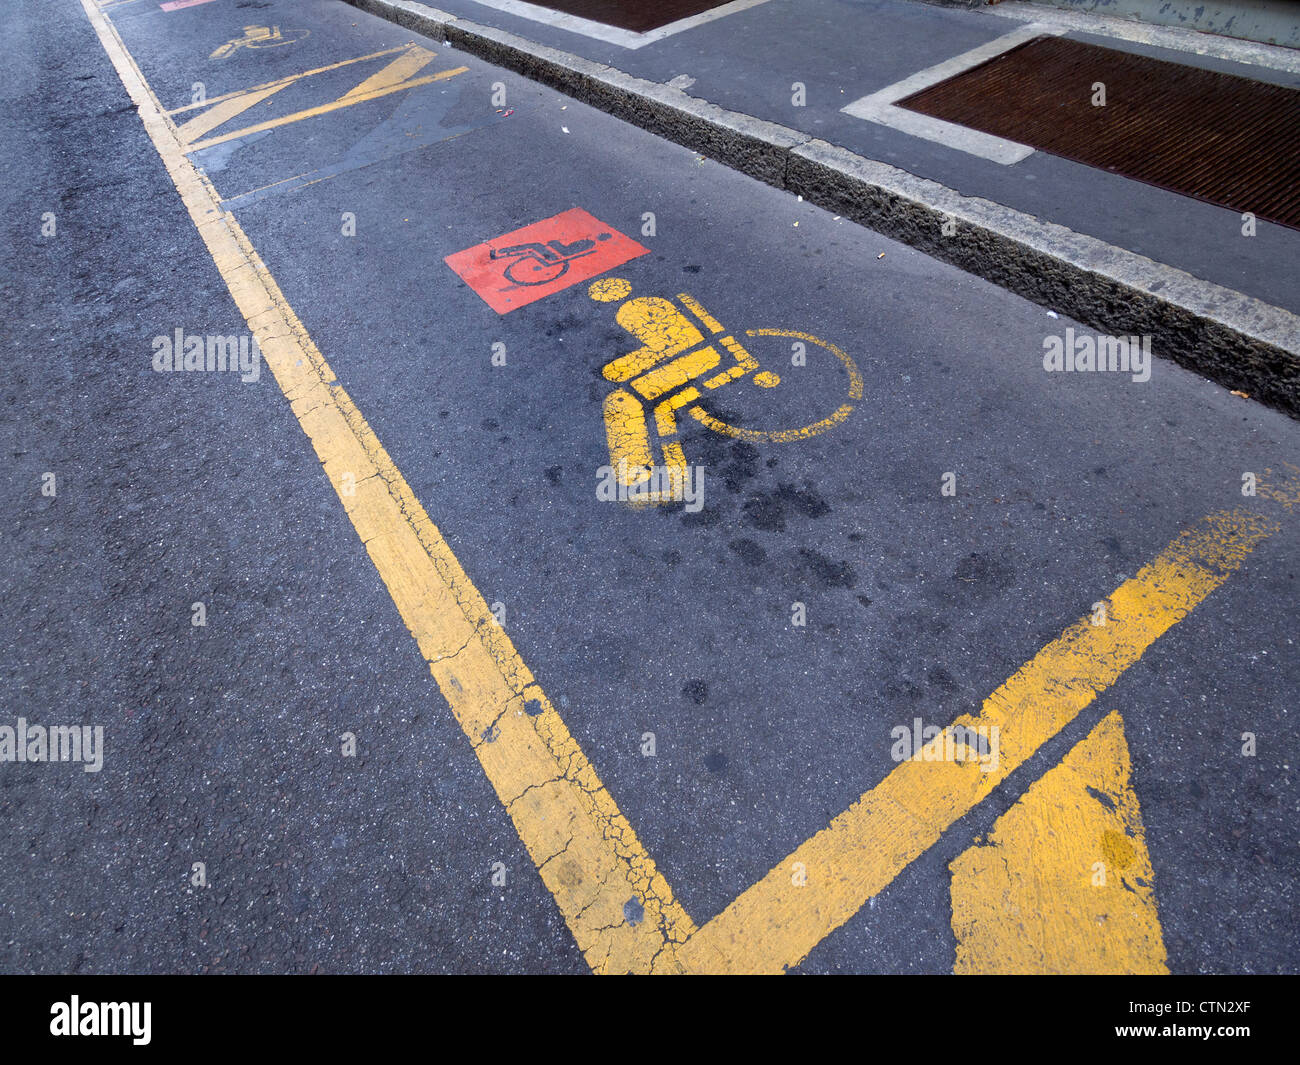 Disabled parking space sign Stock Photo